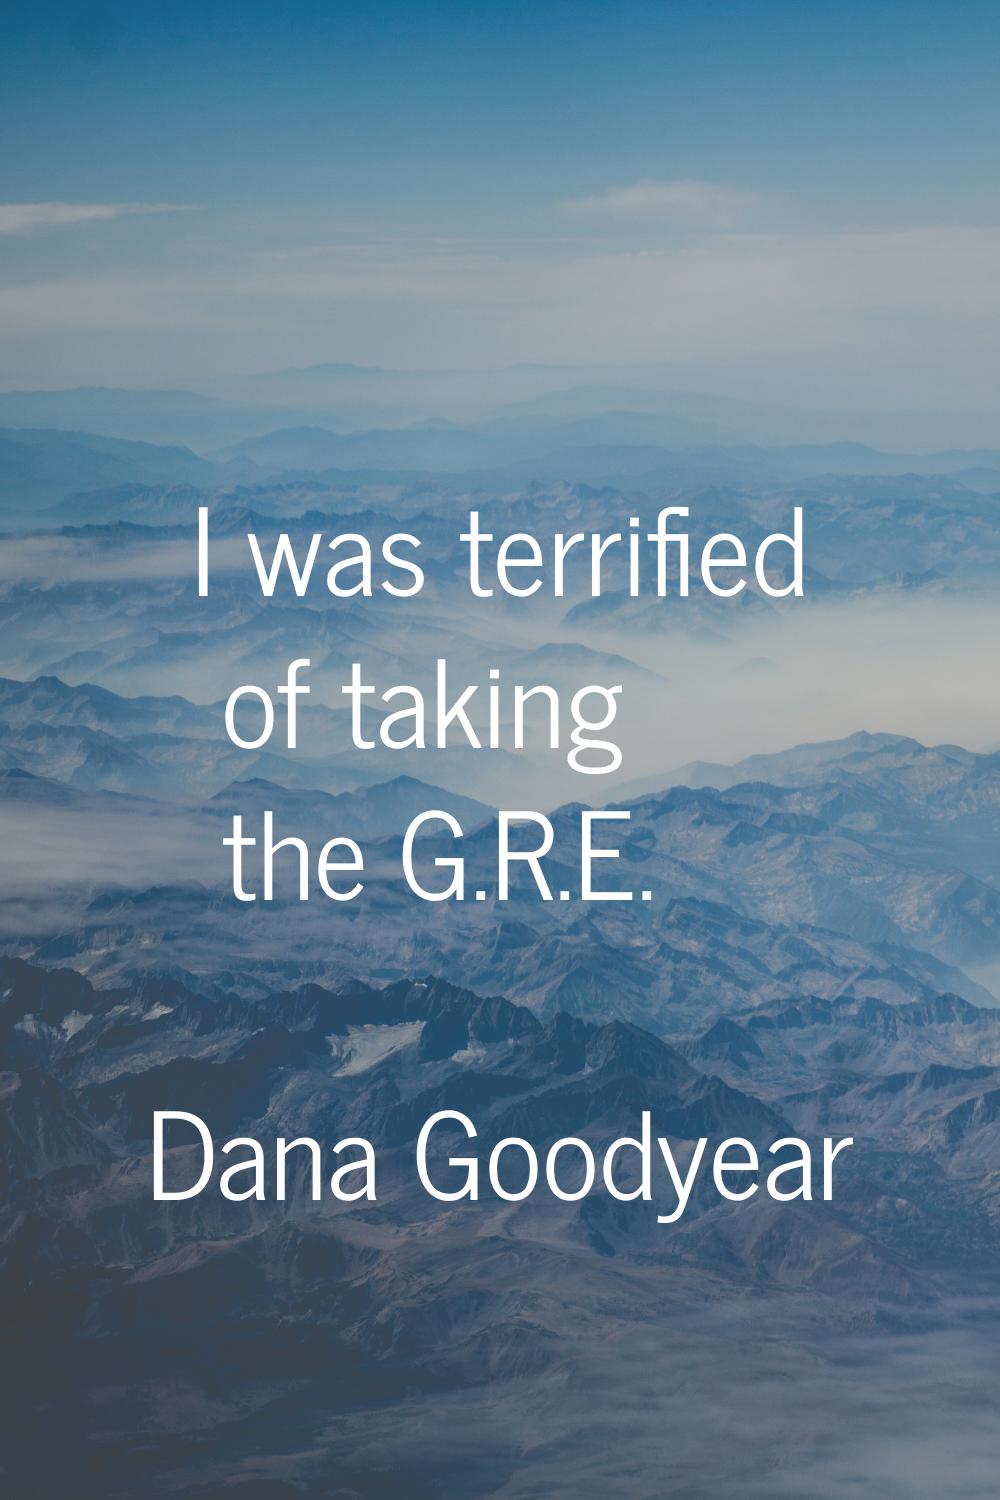 I was terrified of taking the G.R.E.